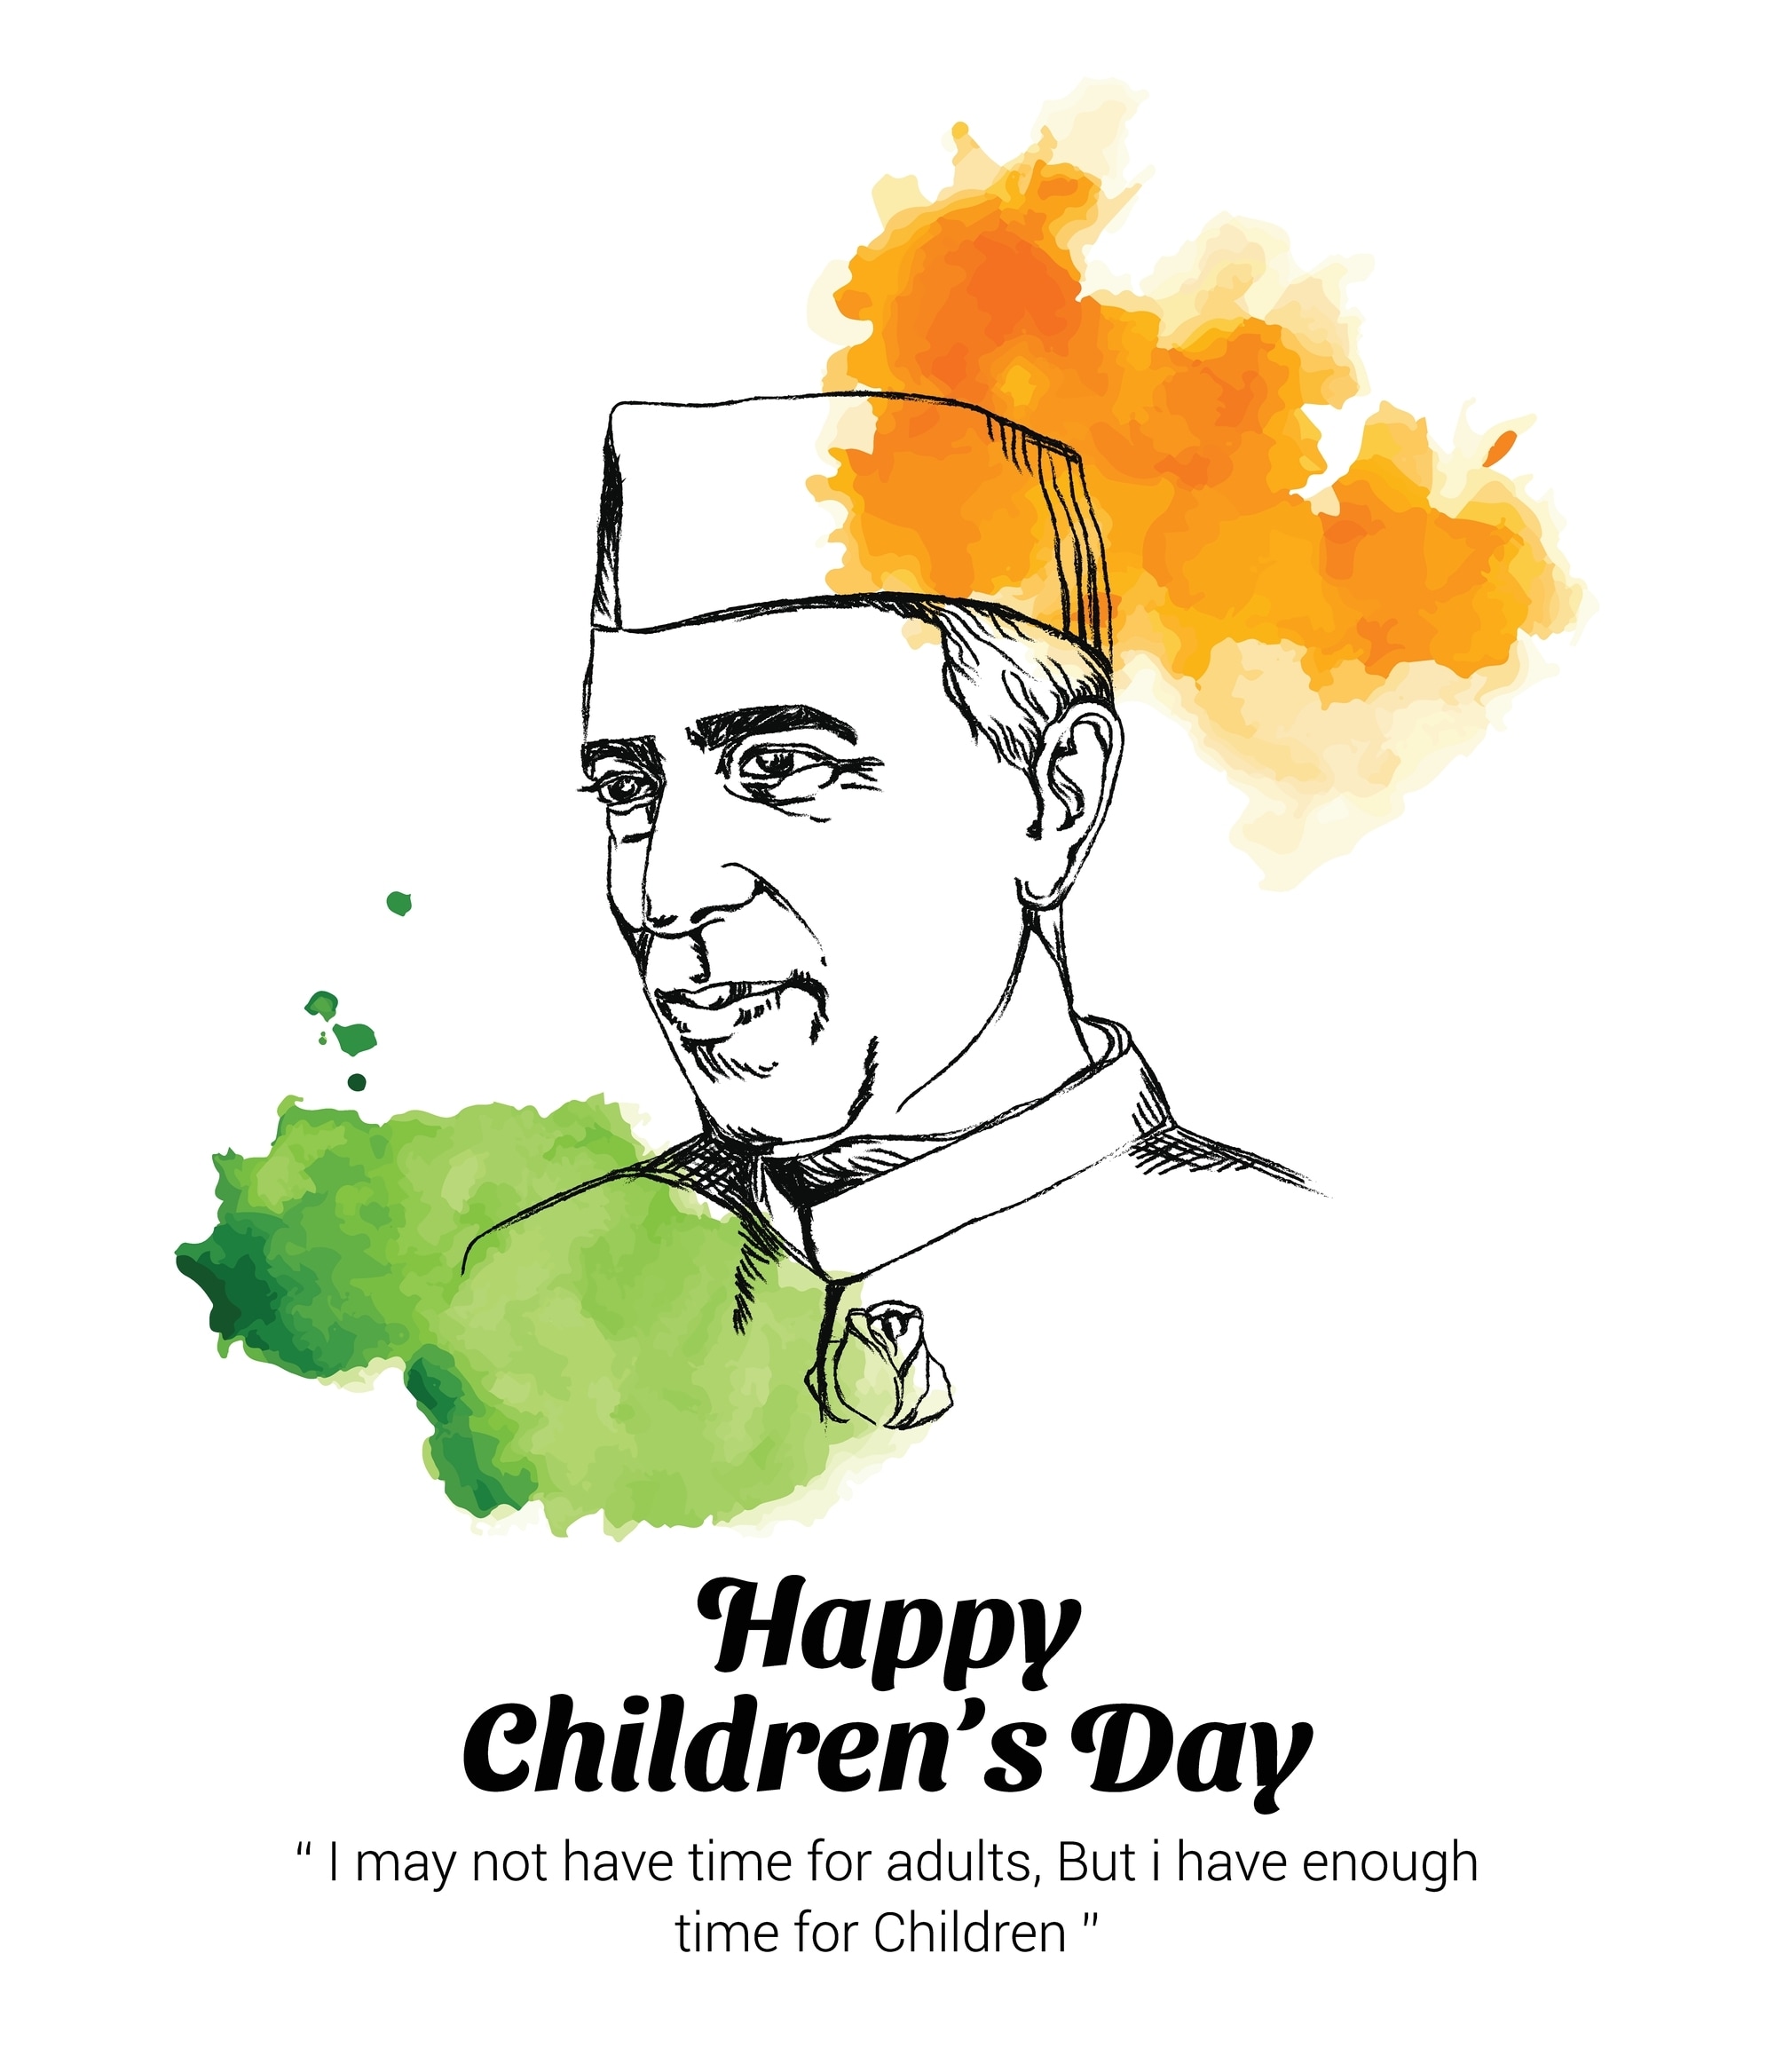 Happy Children's Day, Wishes, messages, quotes, greetings, SMS, WhatsApp and Facebook status to share with your family and friends. (Image: Shutterstock) 